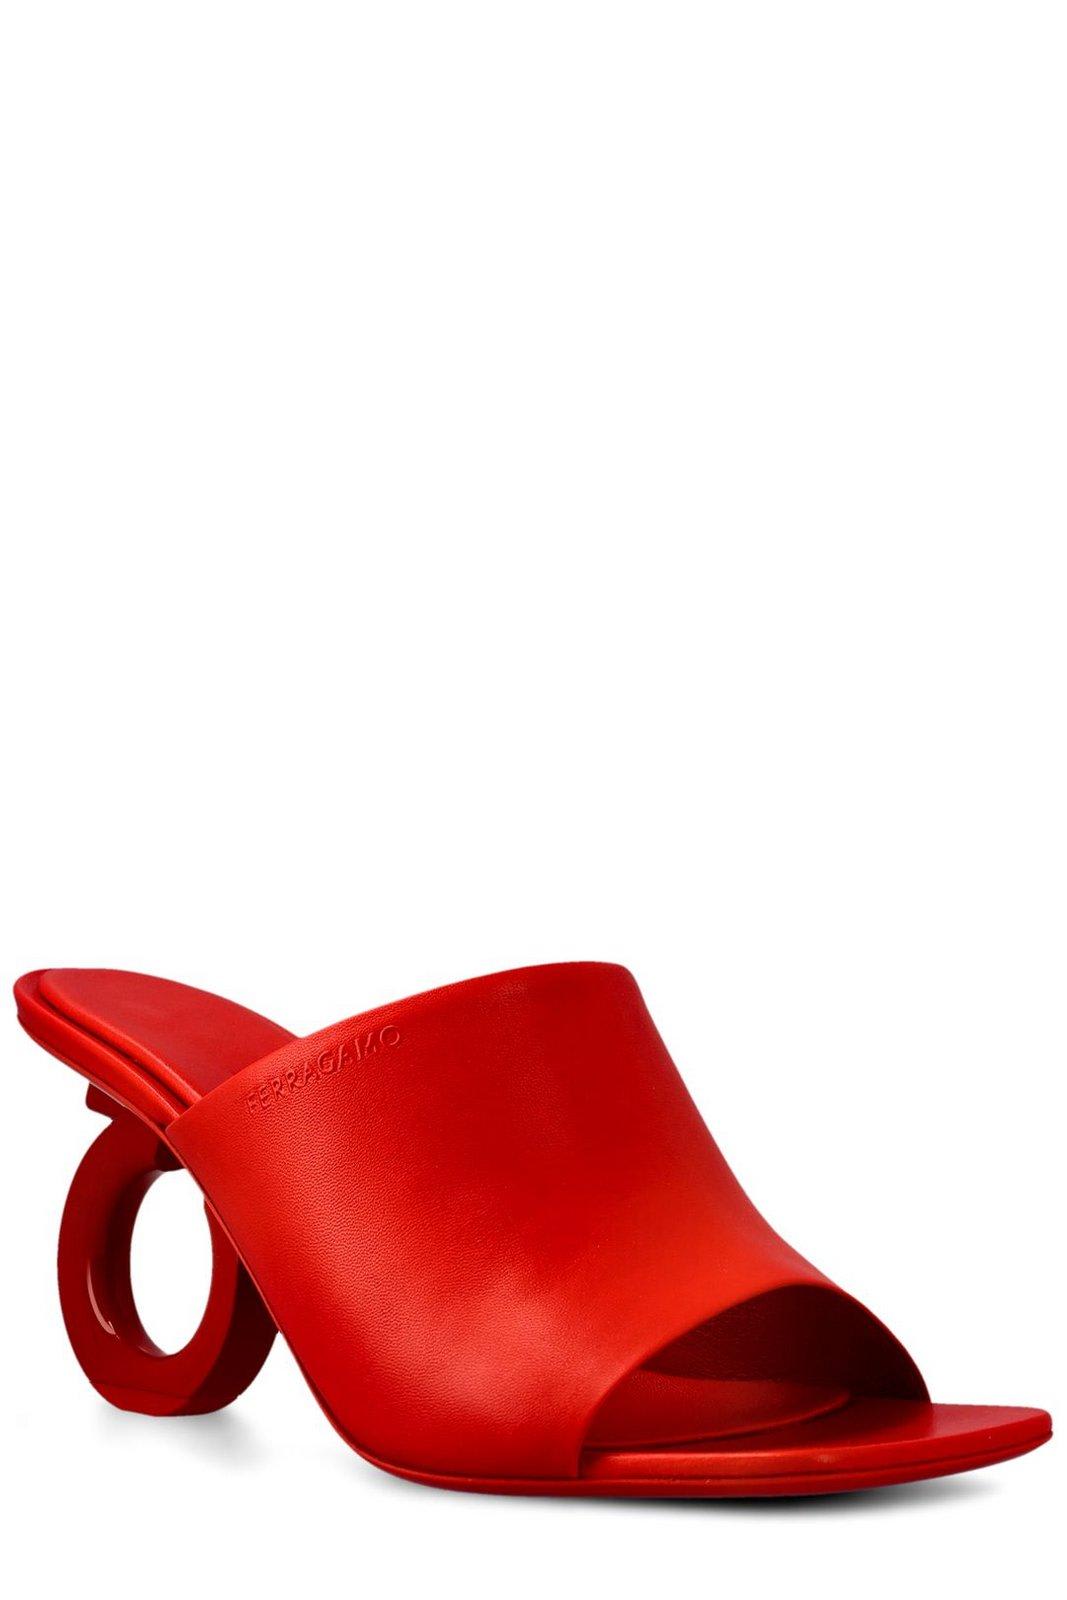 Shop Ferragamo Sculpted-heeled Slip-on Mules In Red